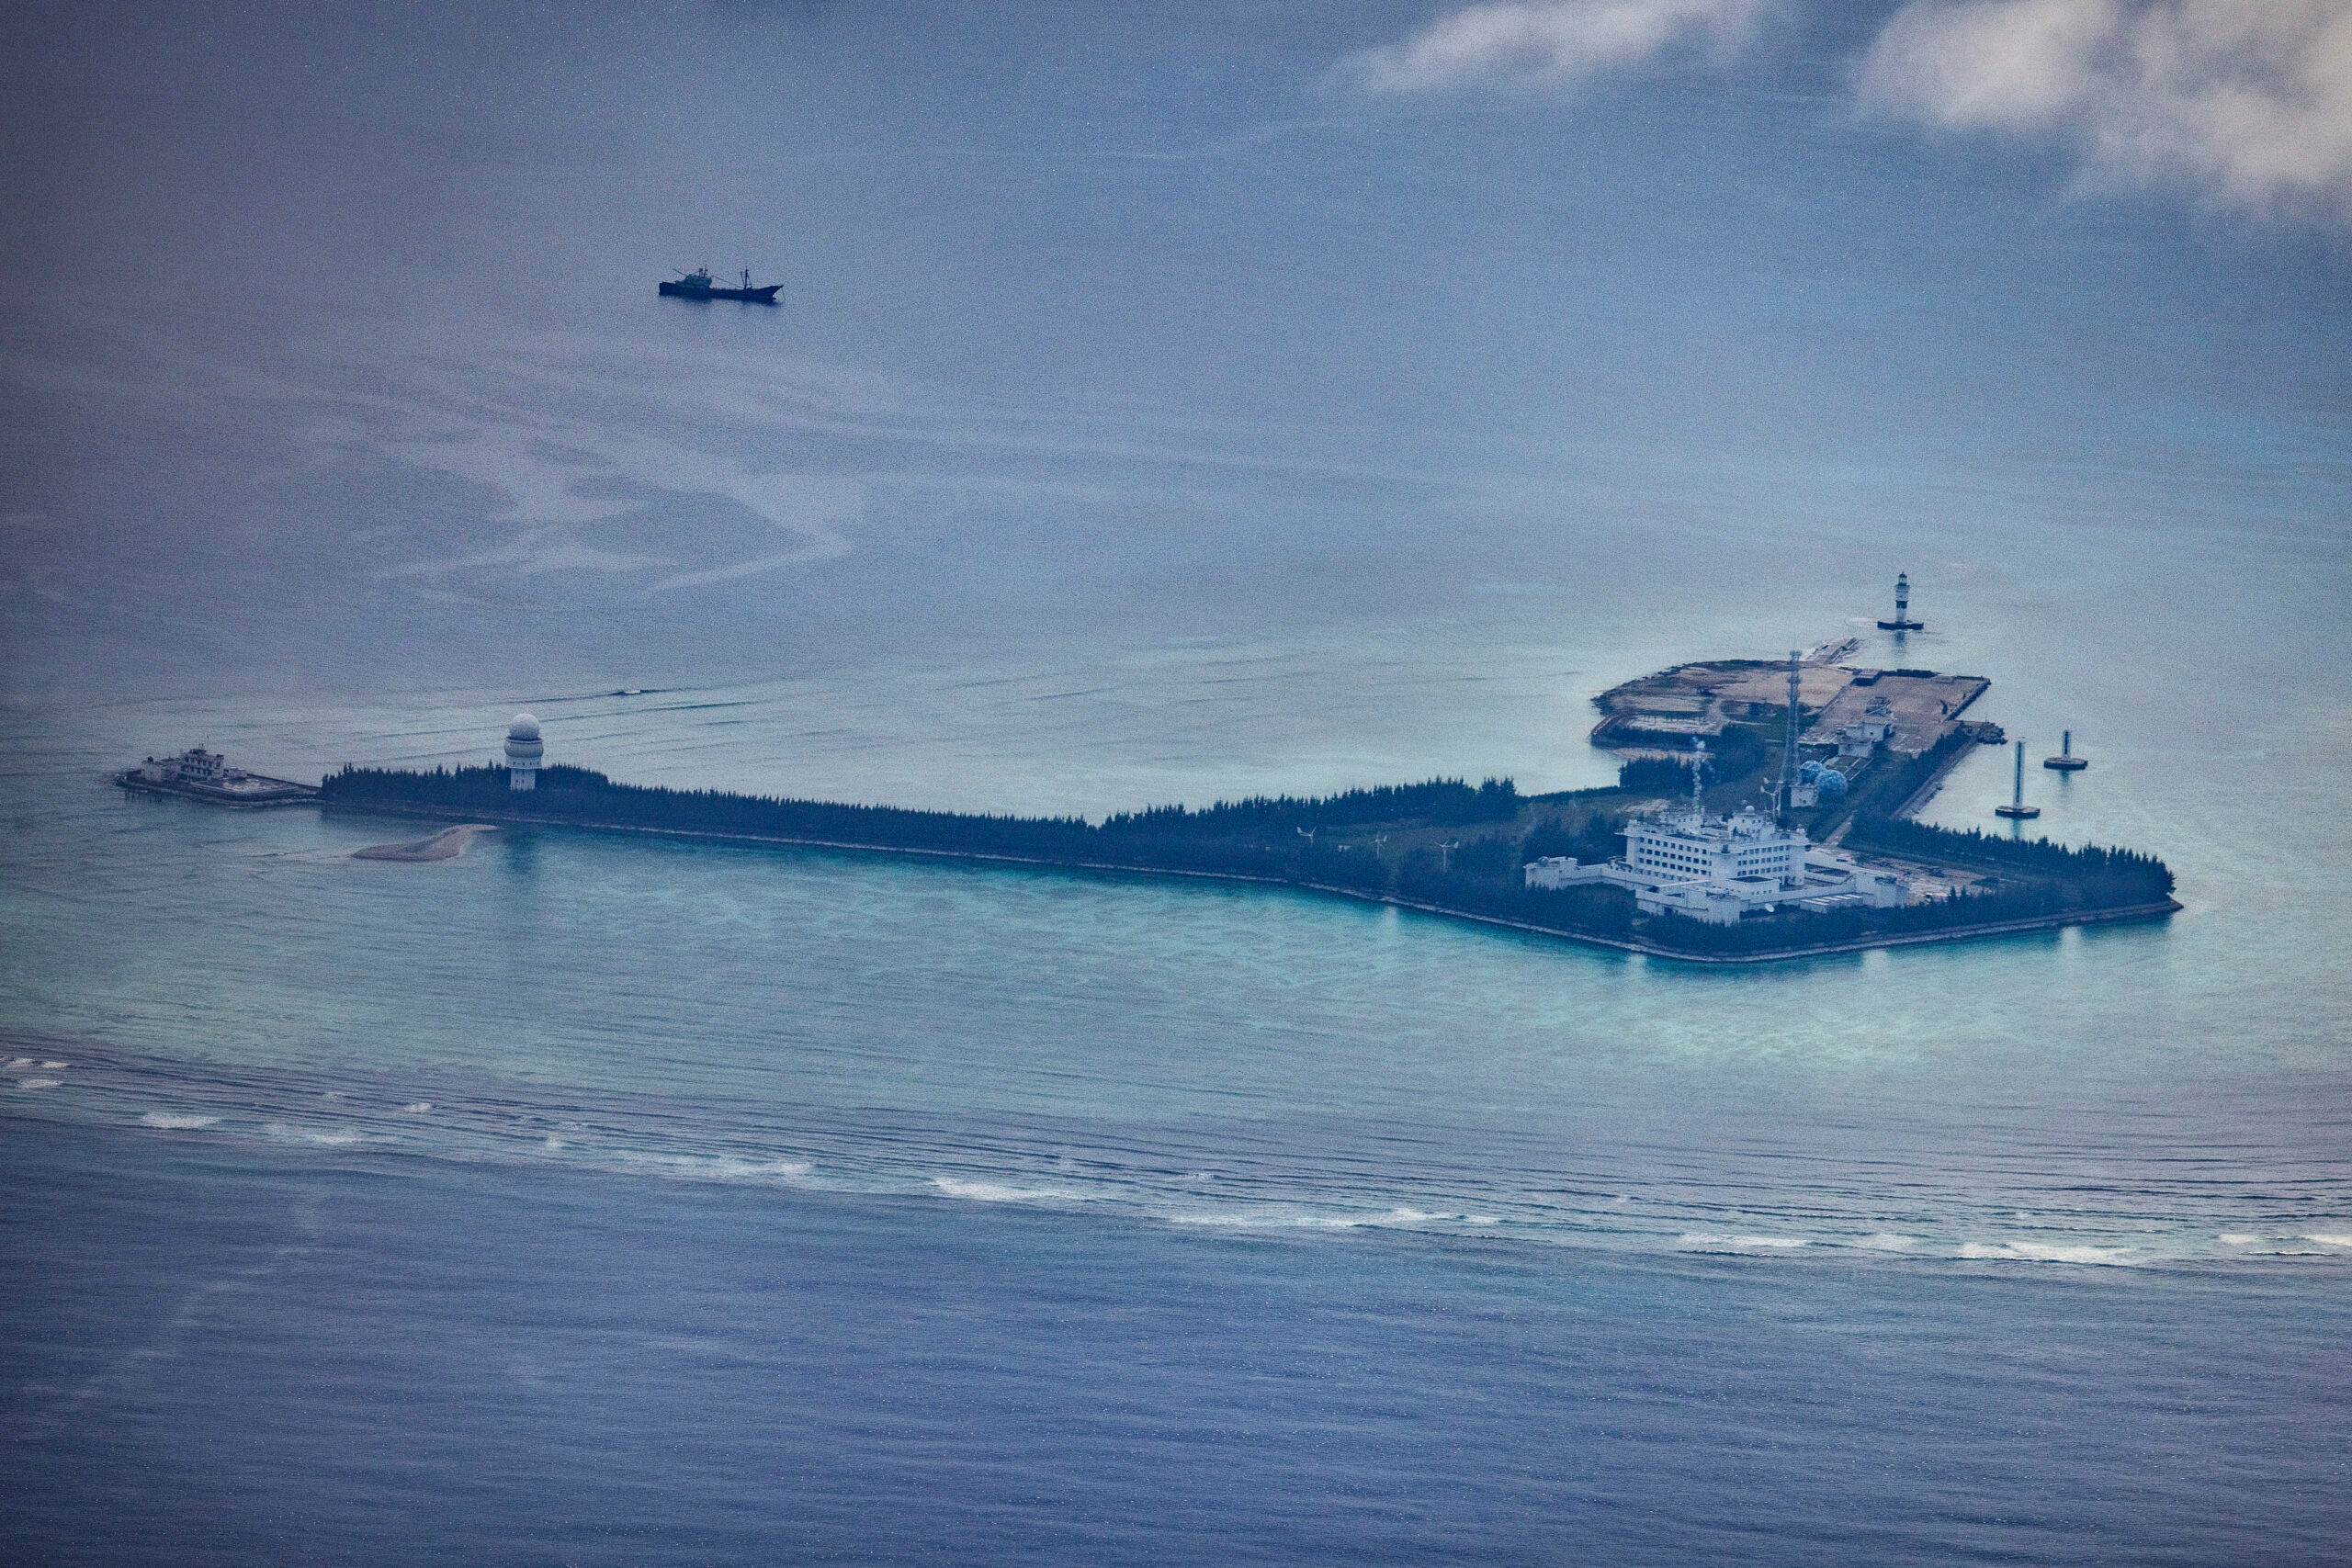 SPRATLY ISLANDS, AT SEA - OCTOBER 25: Buildings and structures are seen on the artificial island built by China in Gaven Reefs on October 25, 2022 in Spratly Islands, South China Sea. China has progressively asserted its claim of ownership over disputed islands in the South China Sea by artificially increasing the size of islands, creating new islands and building ports, military outposts and airstrips. The South China sea is an important trade route and is of significant interest as geopolitical tensions remain high in the region. (Photo by Ezra Acayan/Getty Images)